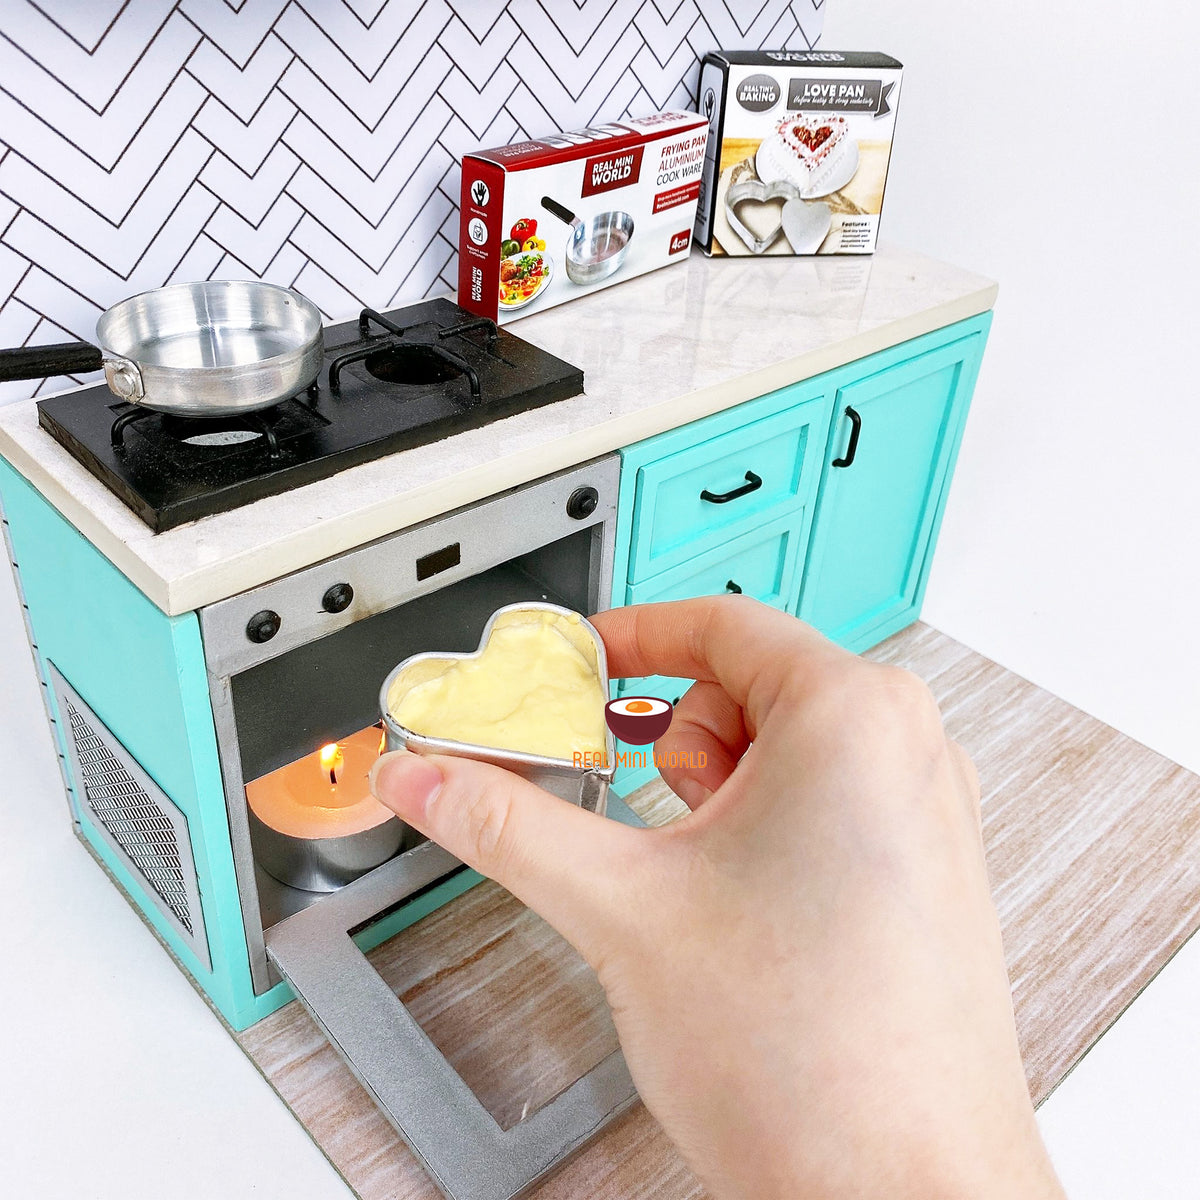 Tiny Cooking, it's an Actual Thing! - Make